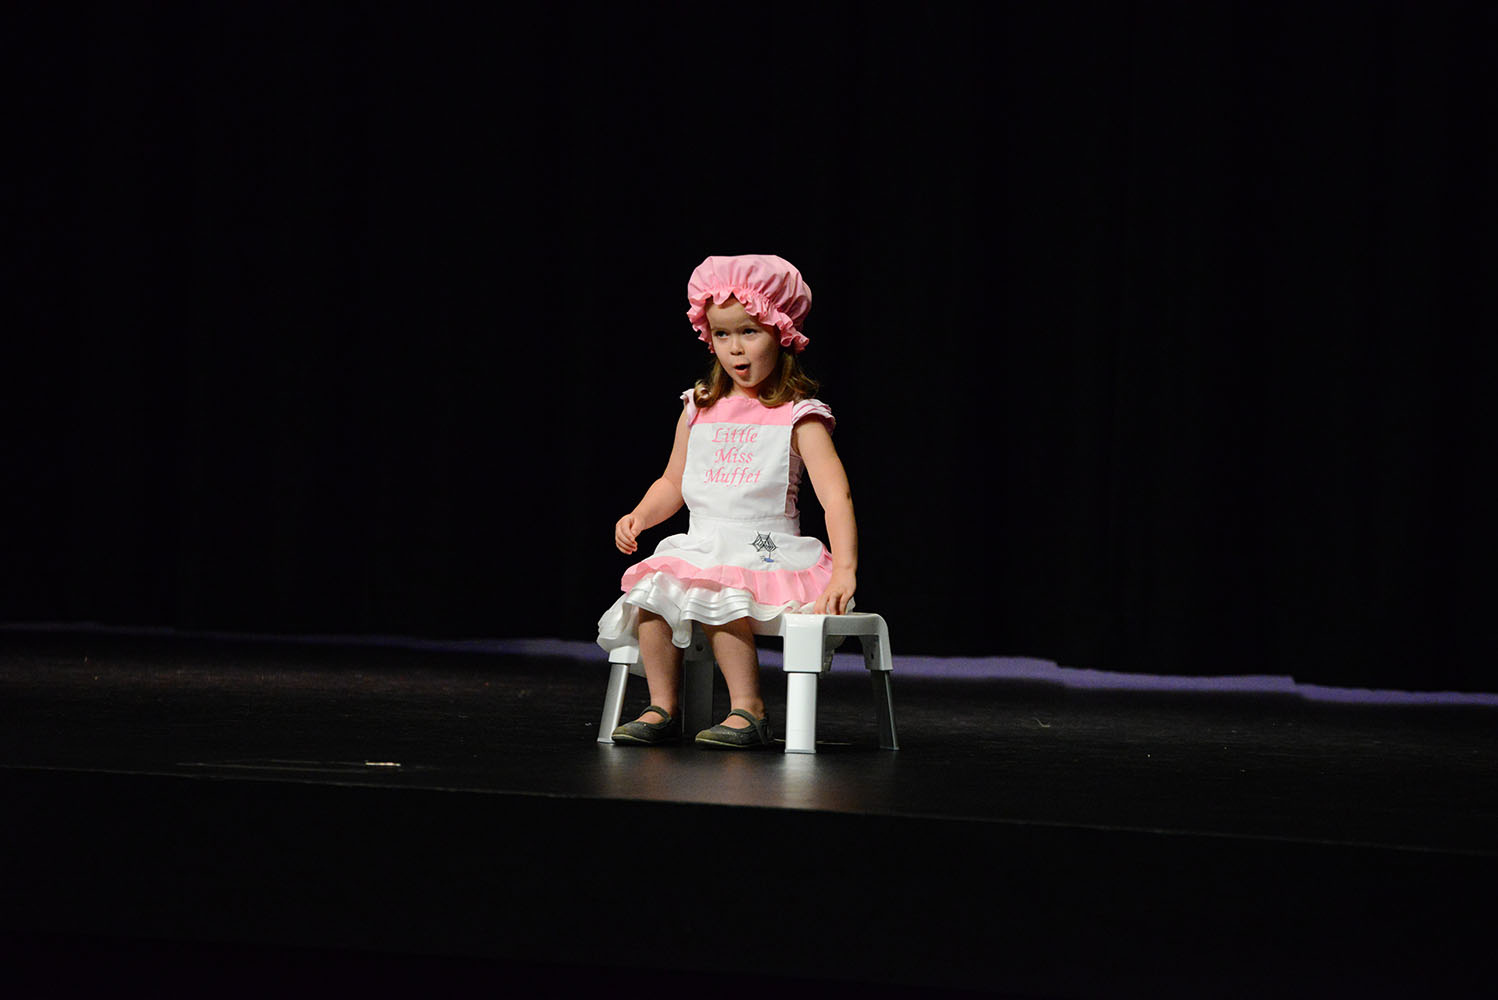 Very young speech & drama performer. Sitting on a stool on stage wearing a white and pink costume.